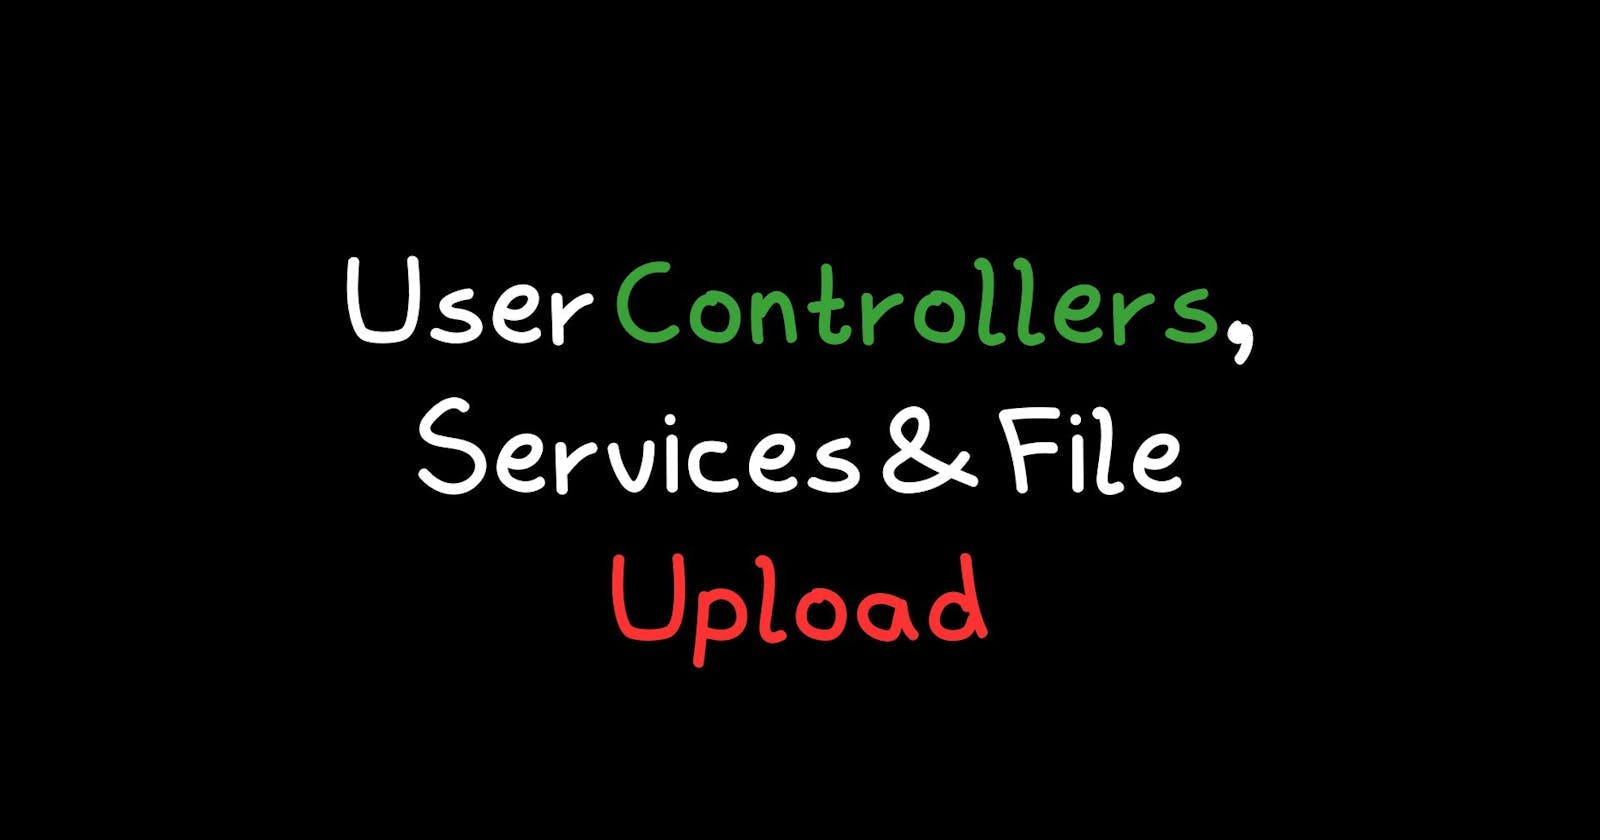 User Controllers, Services & File Upload (Day 4) - Creating a SaaS Startup in 30 Days